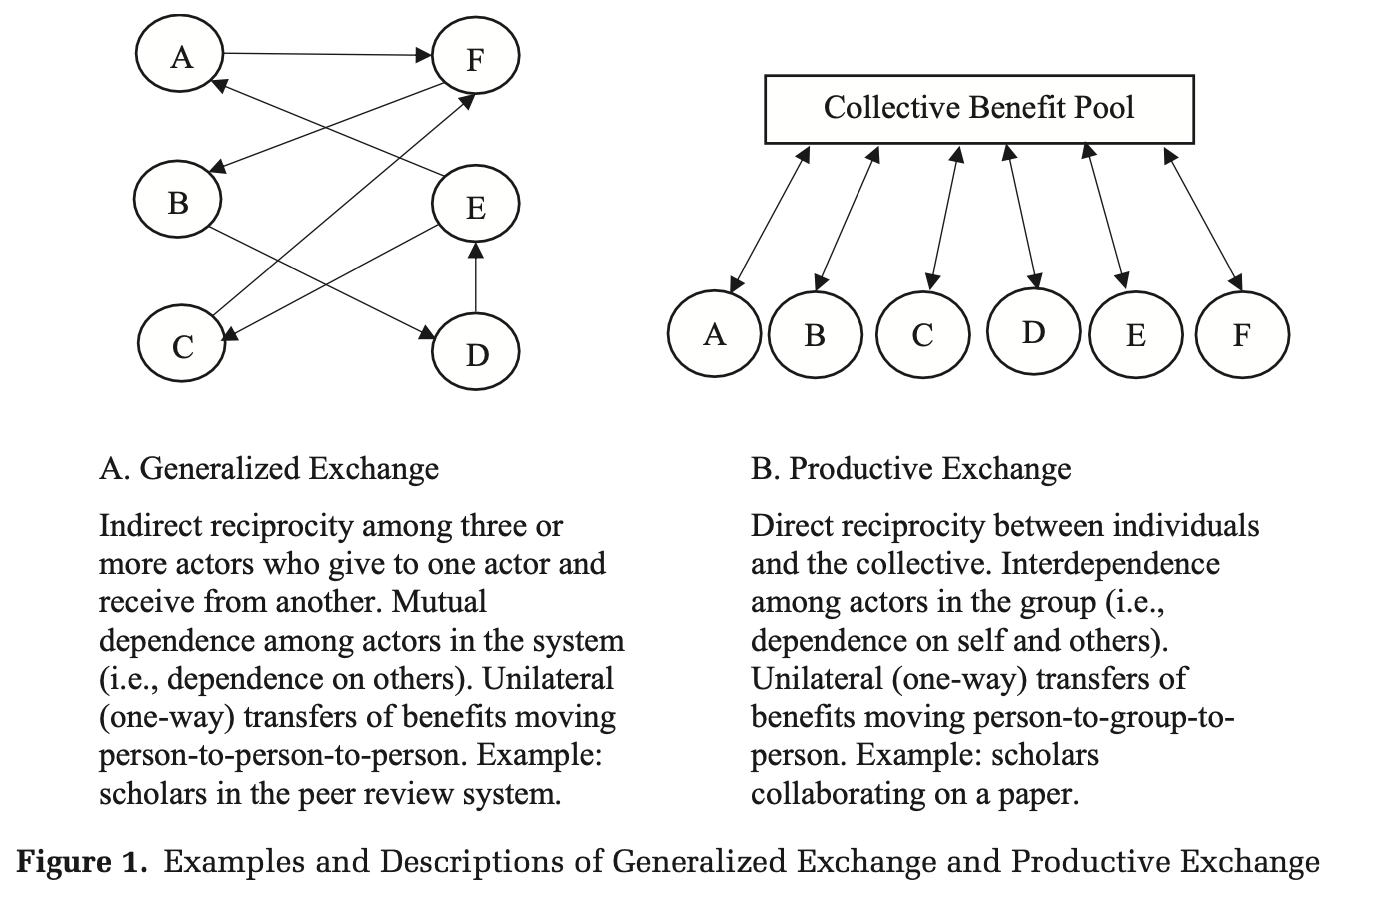 From Generalized Generosity: How the Norm of Generalized Reciprocity Bridges Collective Forms of Social Exchange